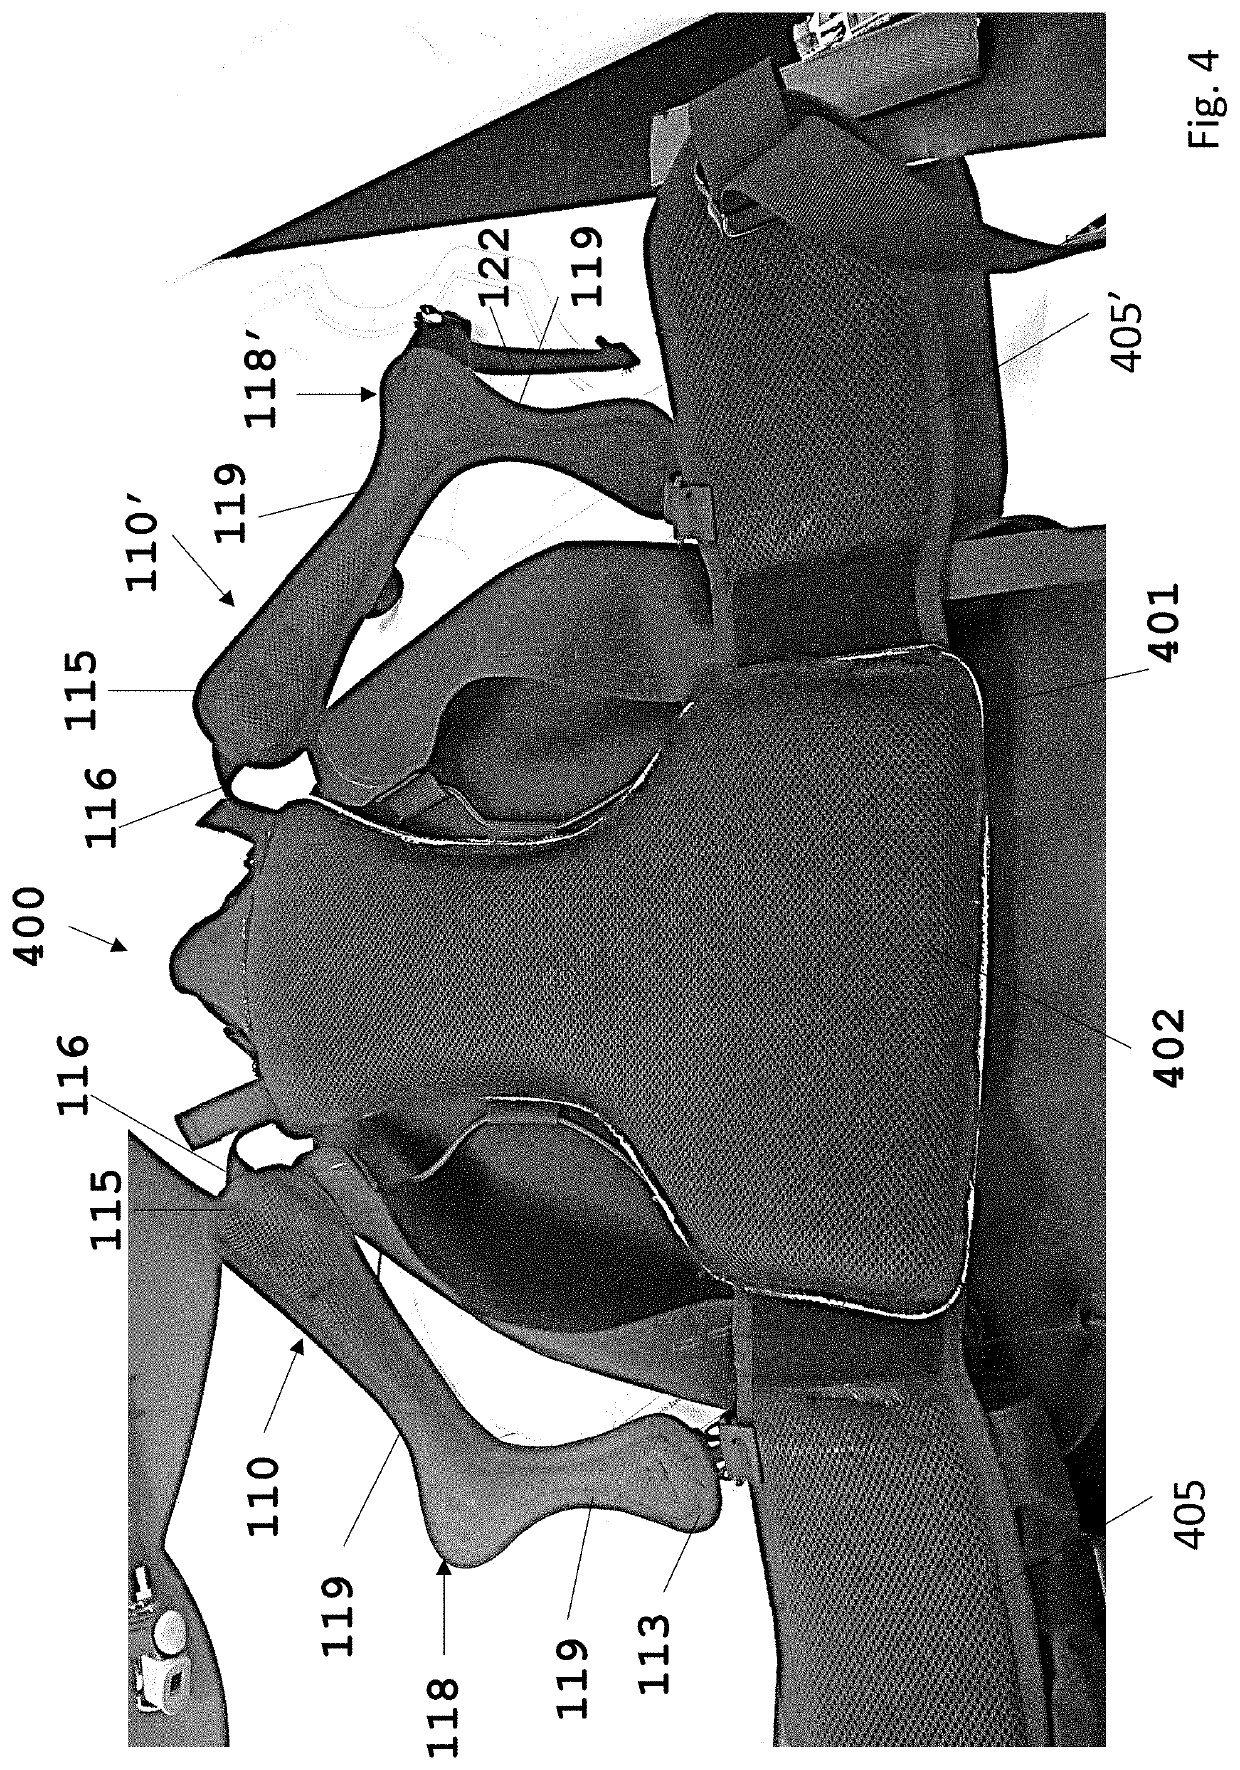 Shoulder strap for supporting back loads, device for carrying back loads, and in particular buoyancy compensator, or the like